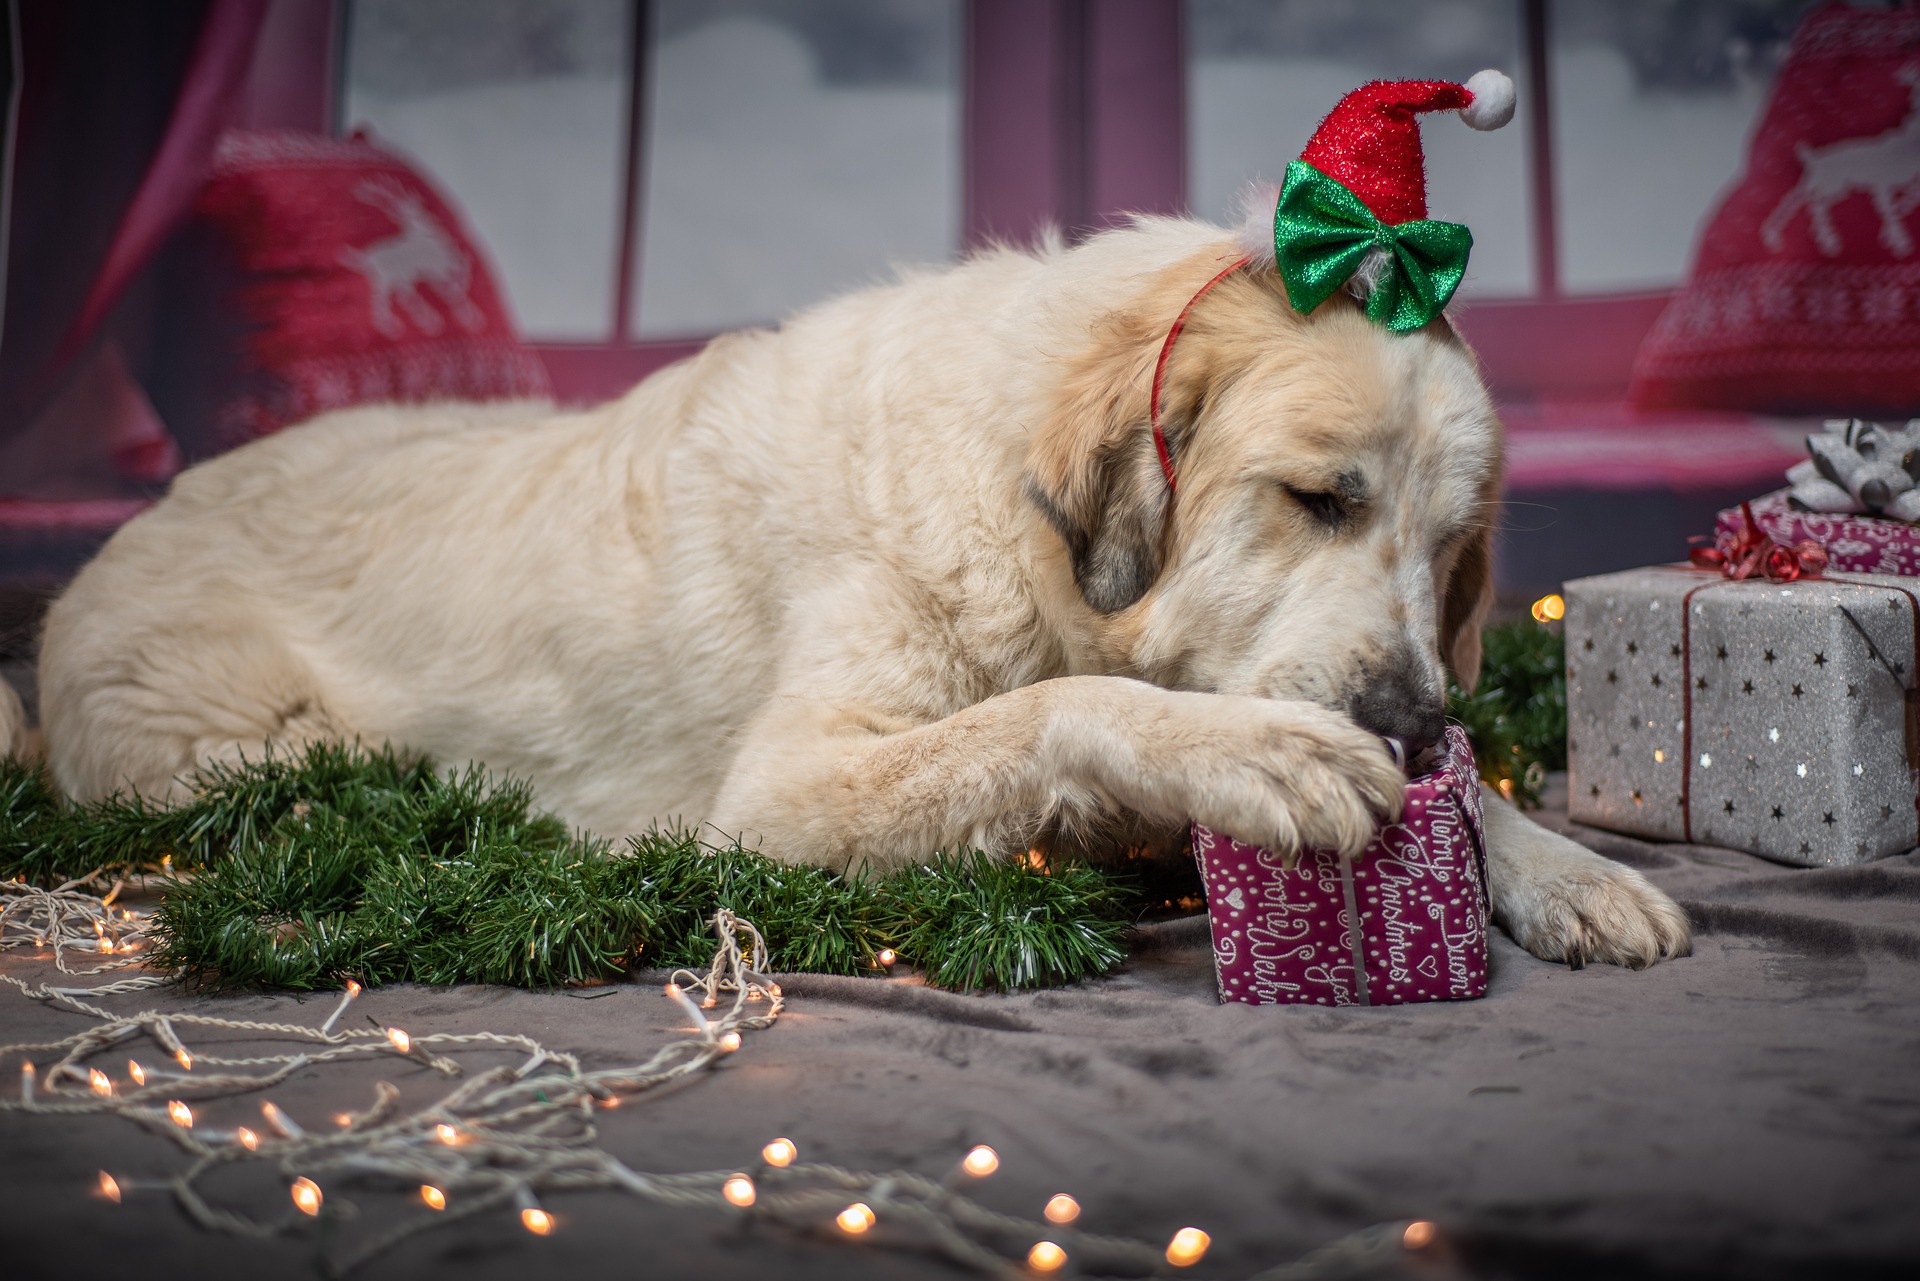 The Best Dog Christmas Gifts That You & Your Pup Will Love!